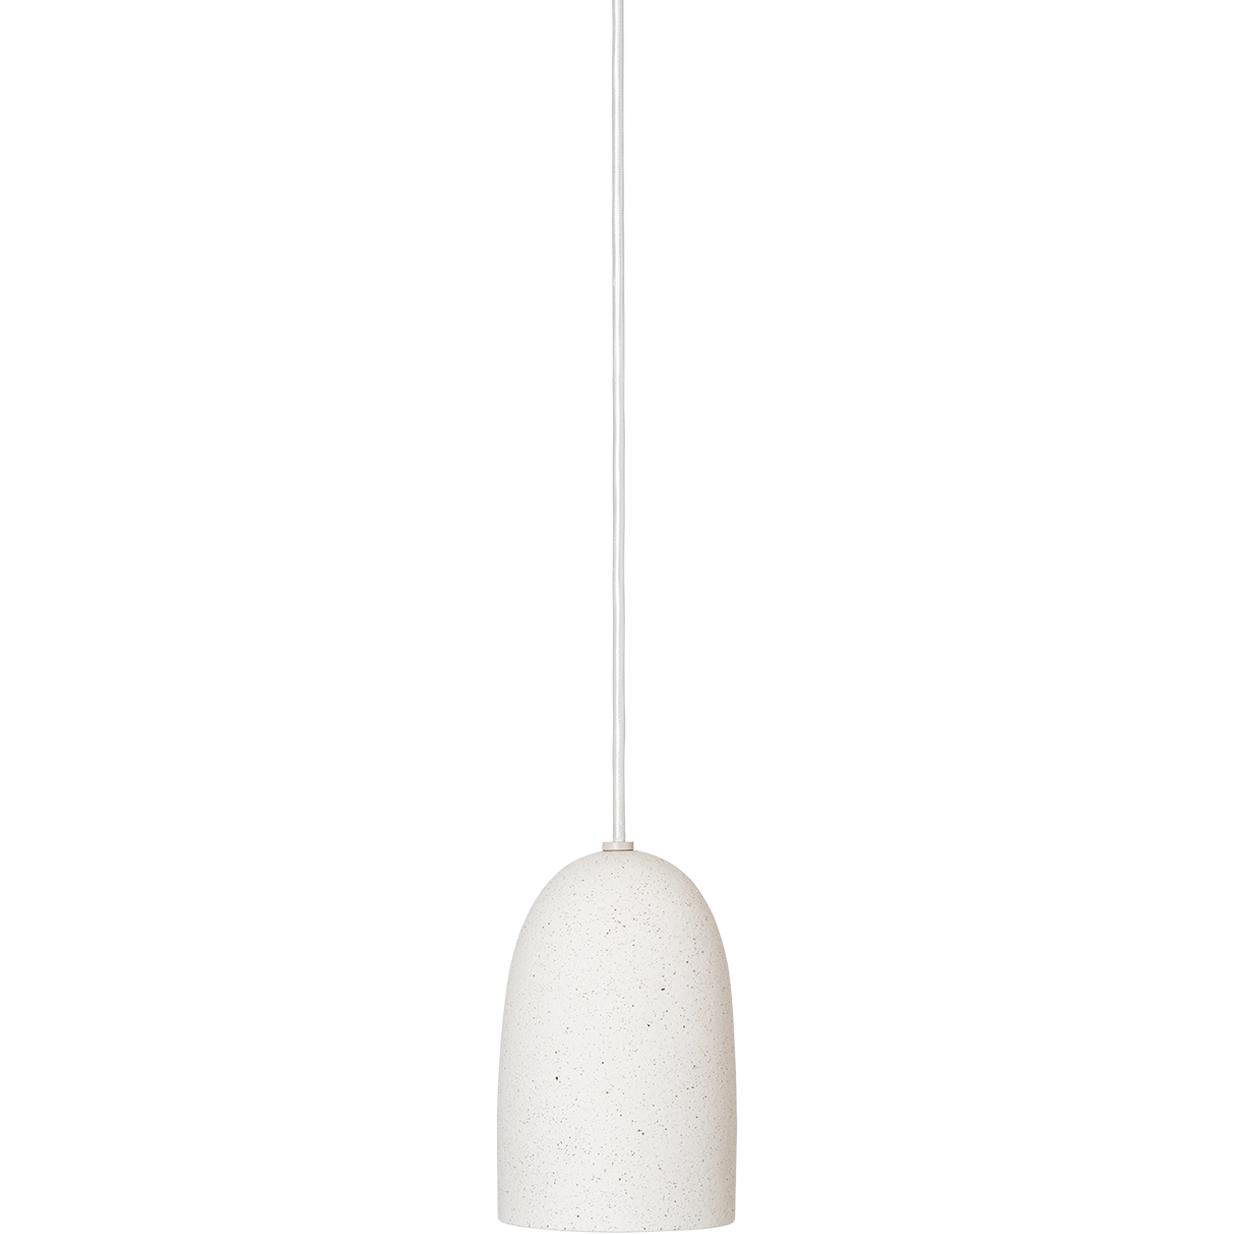 Ferm Living Speckle吊灯，小